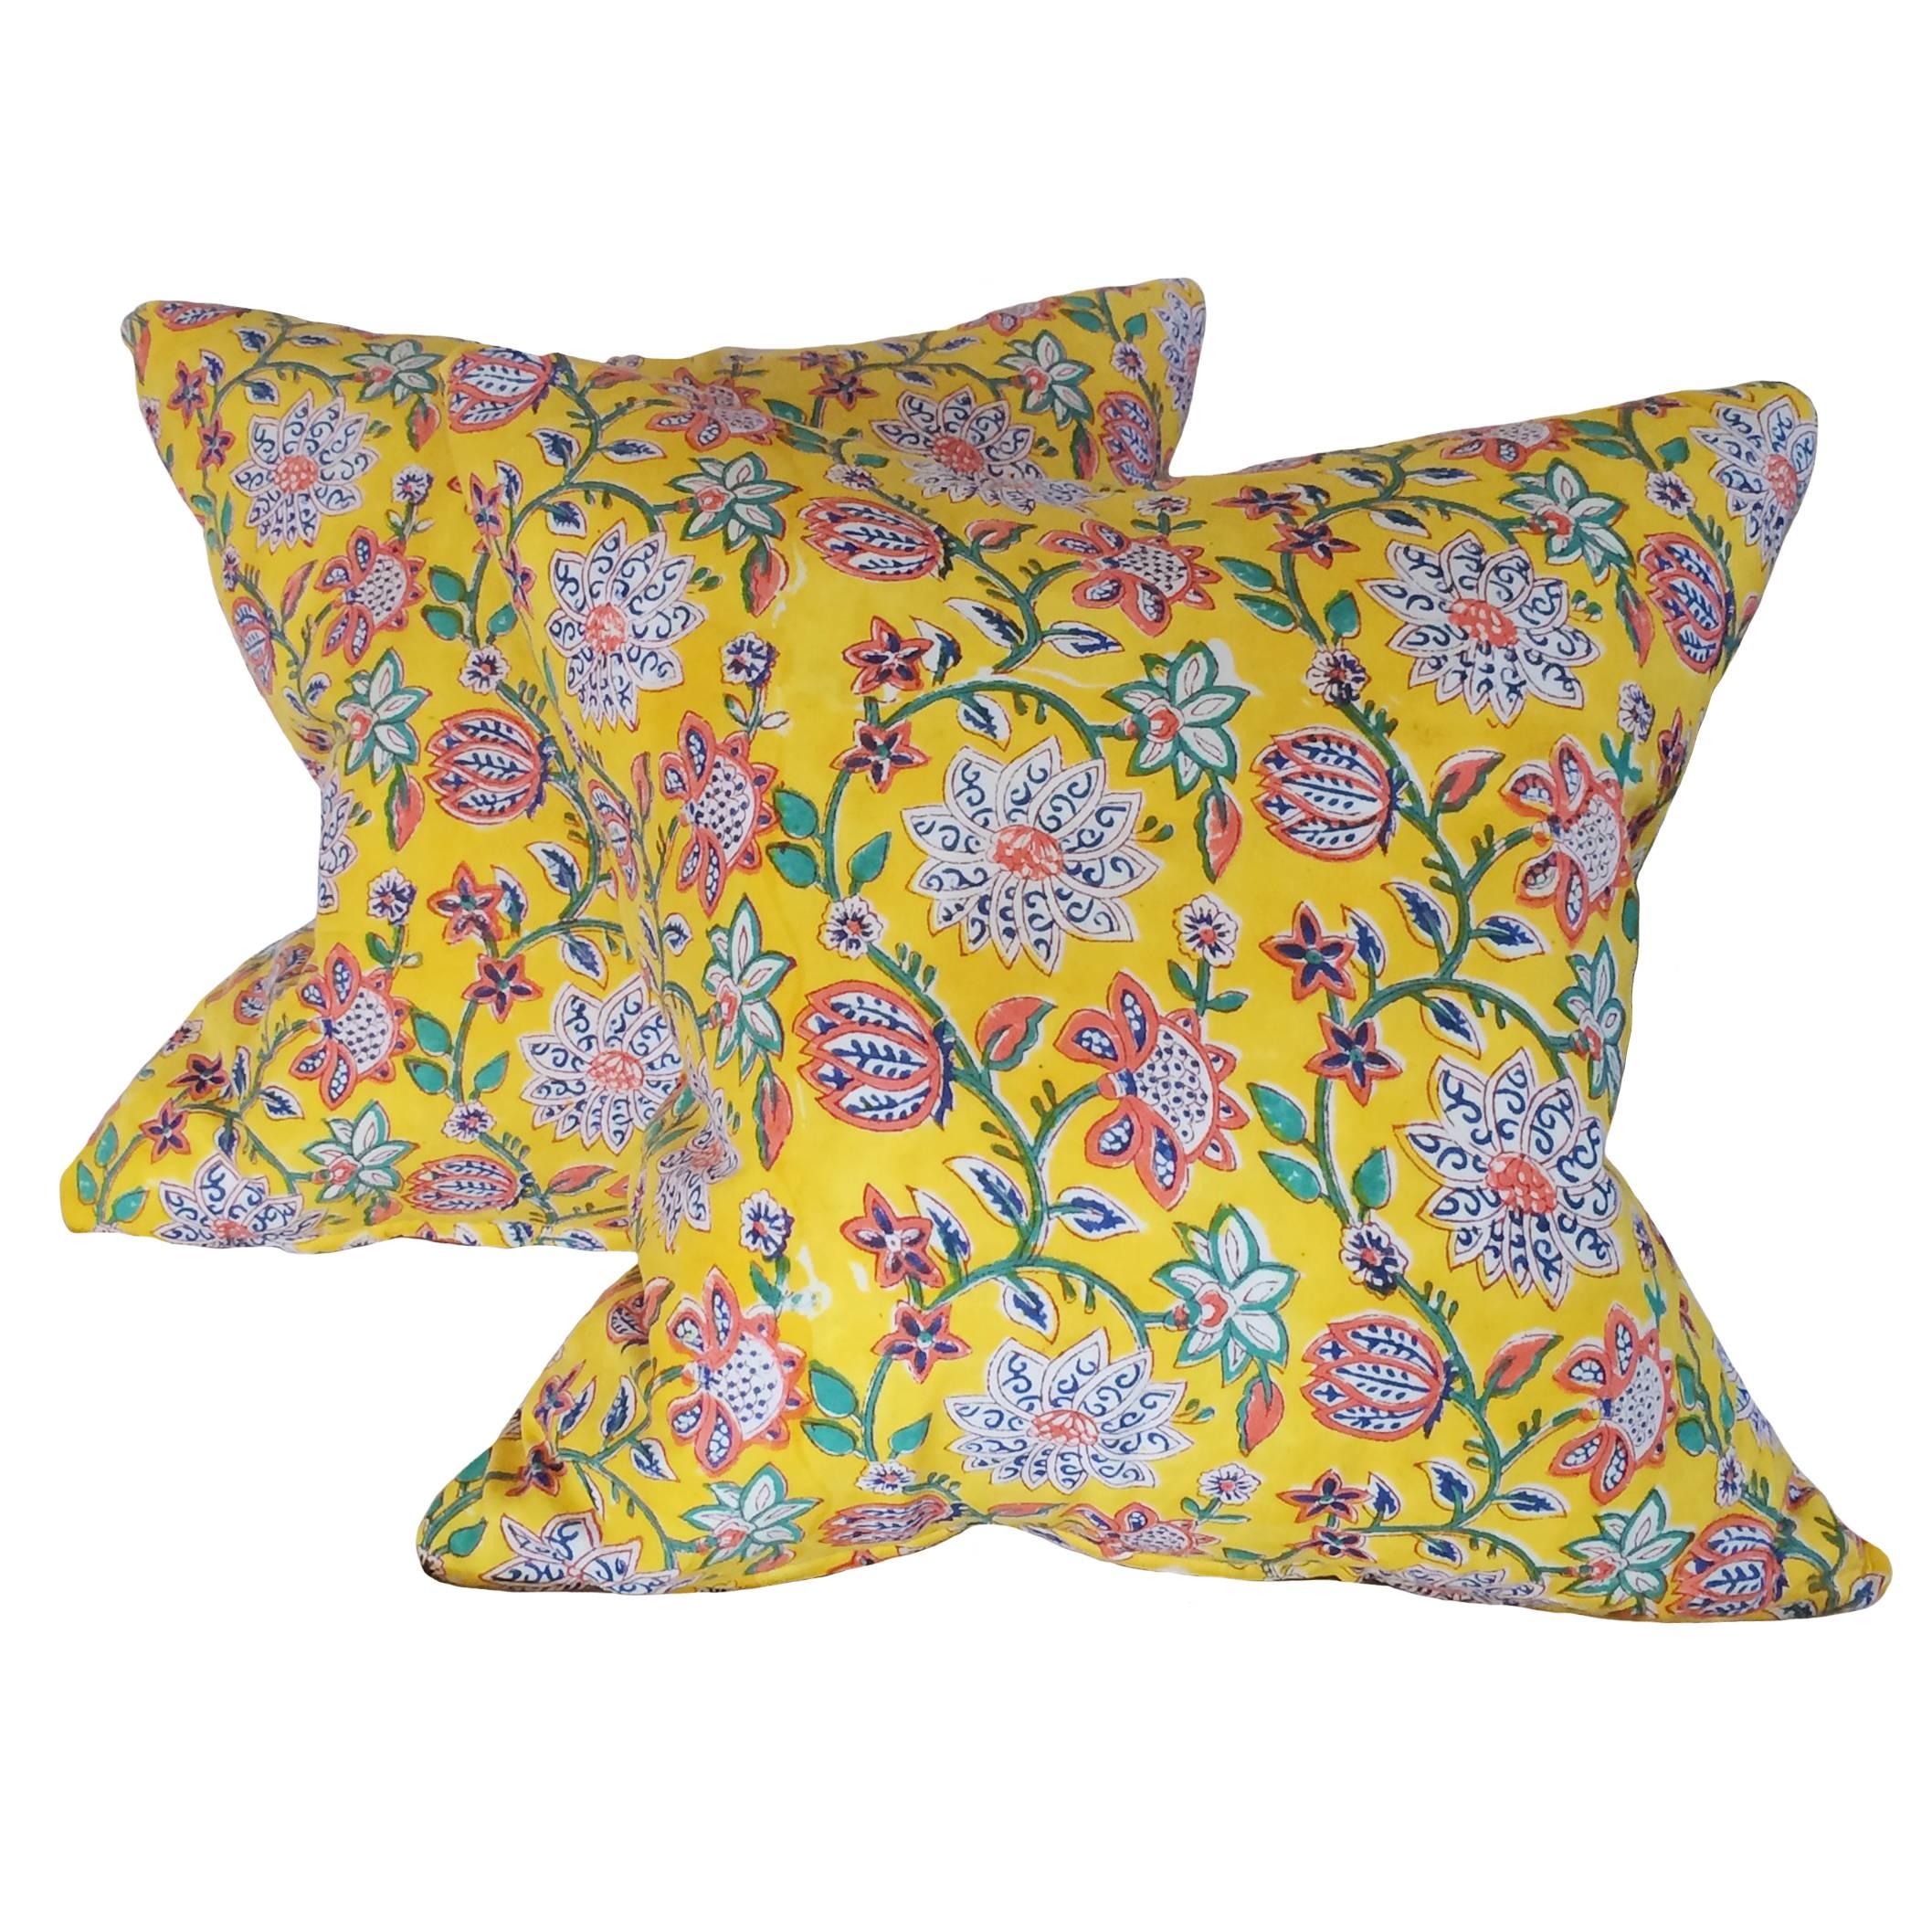 A pair of vibrant yellow cotton Indian Batik down pillows with a floral pattern; vintage batik fabric on both sides; 19th century. The cotton as soft as a baby's bum.